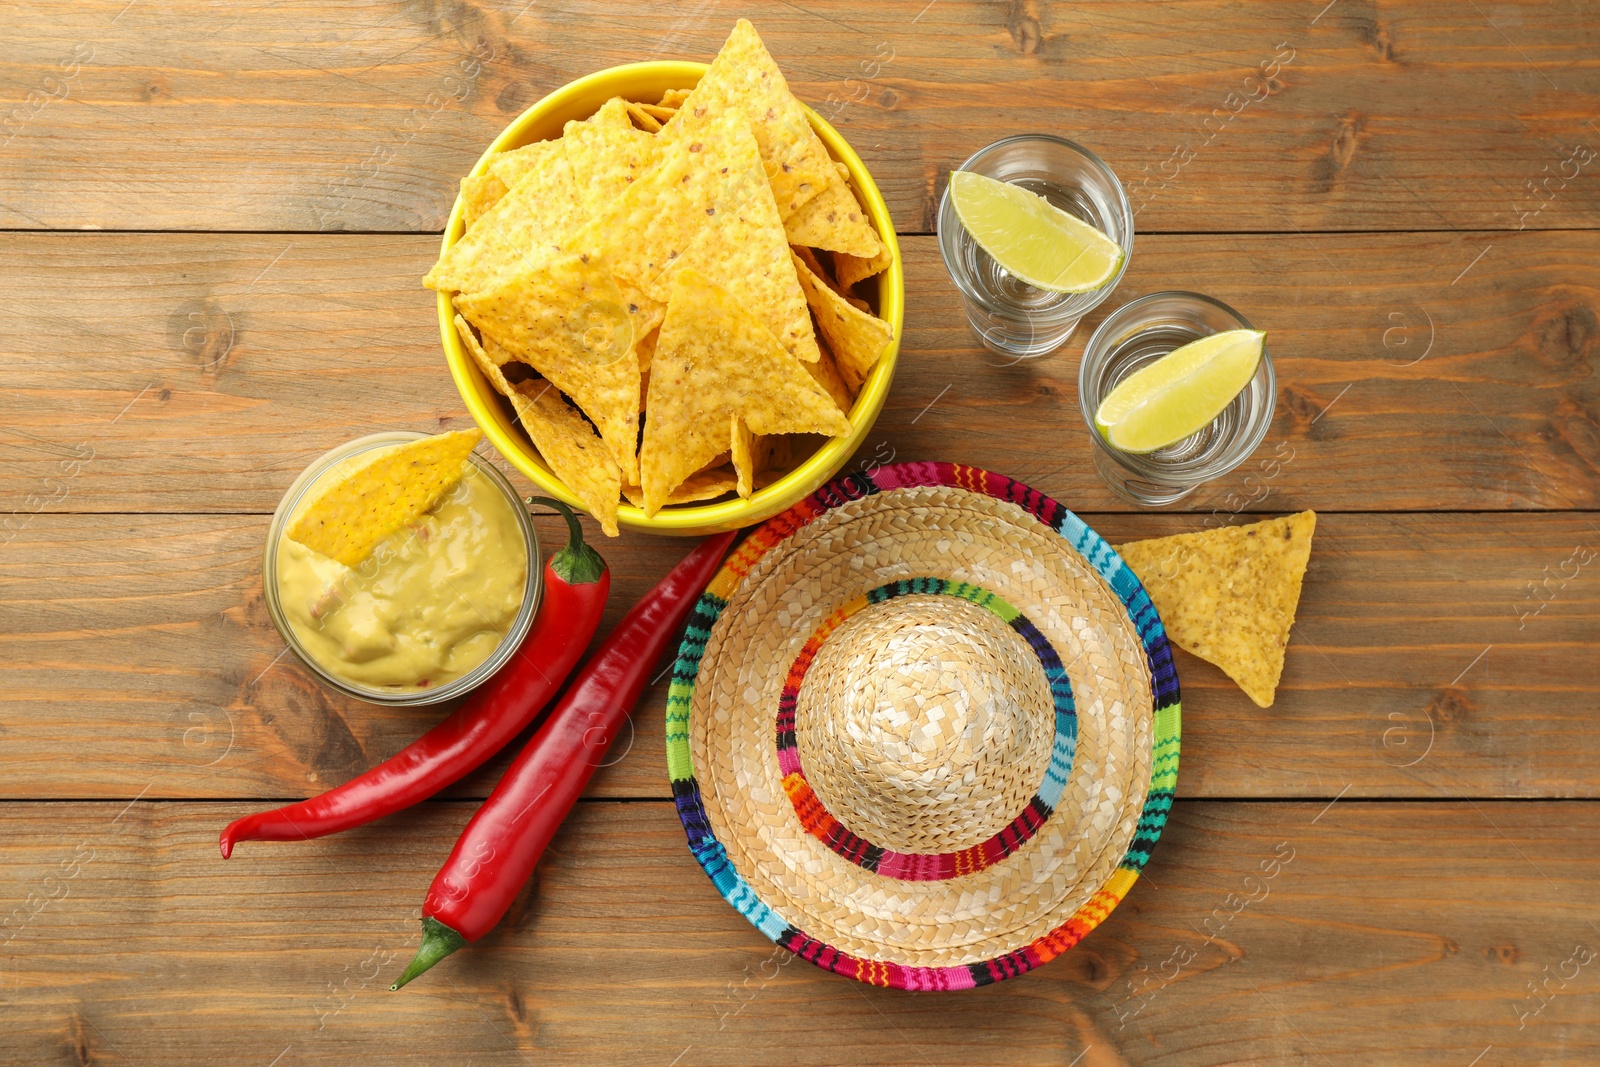 Photo of Mexican sombrero hat, tequila, chili peppers, nachos chips and guacamole on wooden table, flat lay